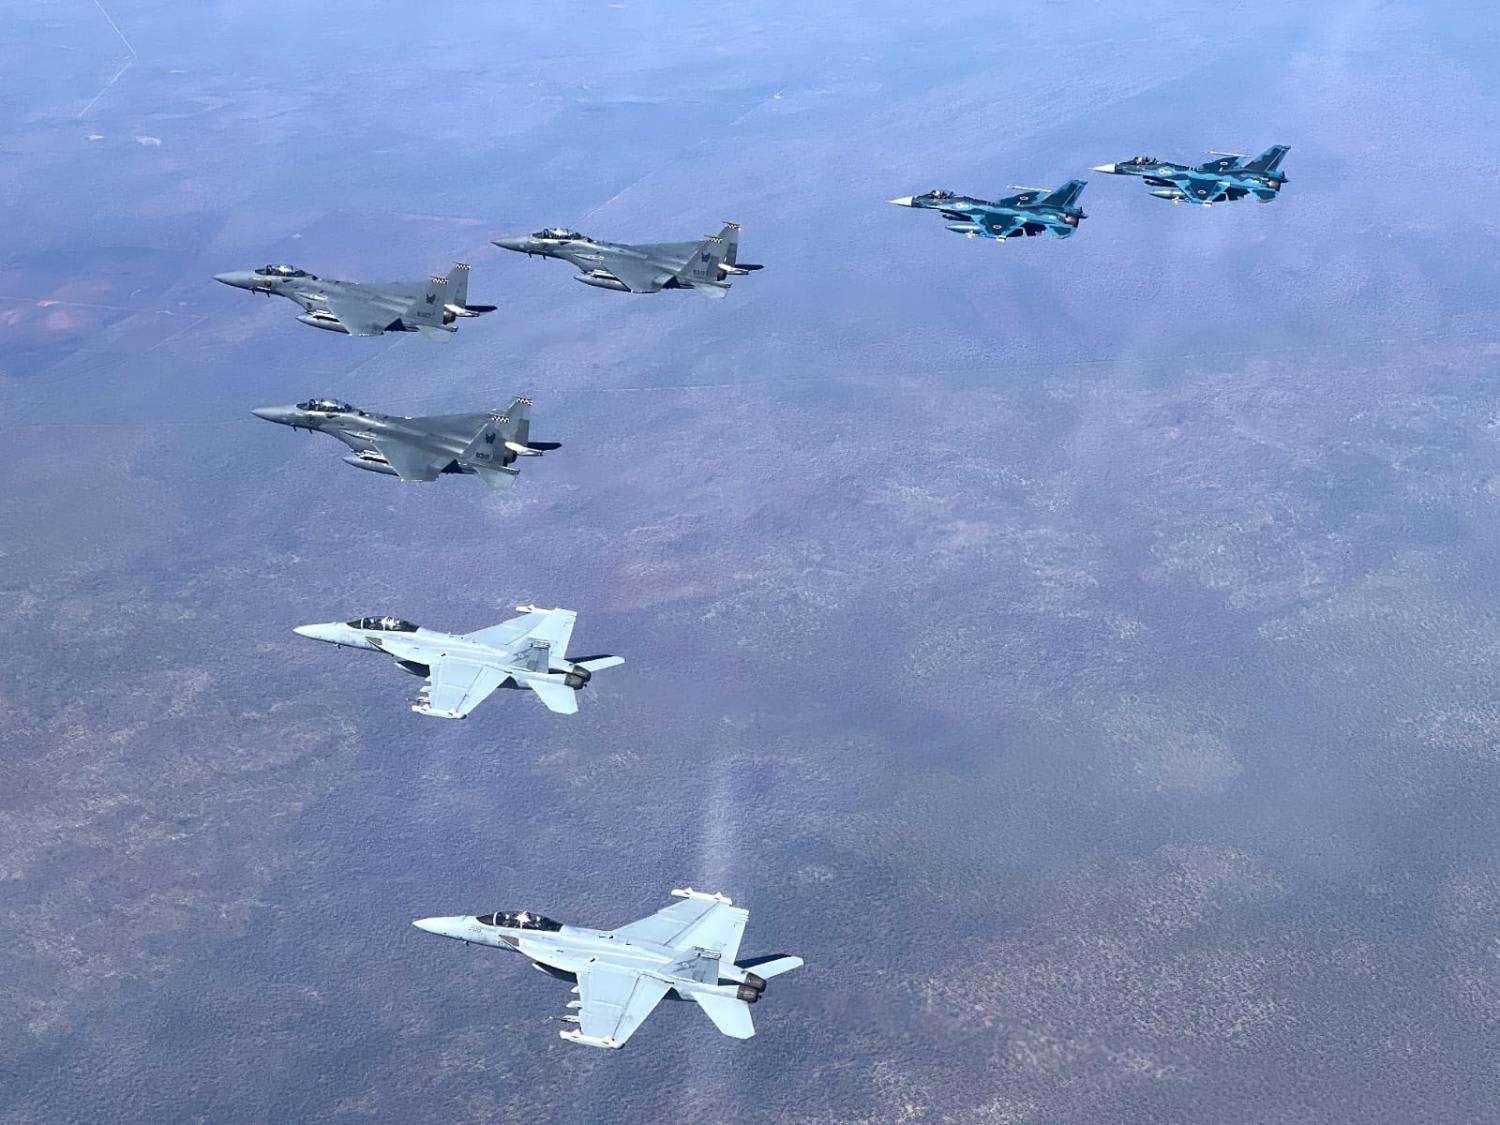 formation_flying_with_raaf_ea-18g_growlers_and_jasdf_f-2_fighter_aircraft.jpg